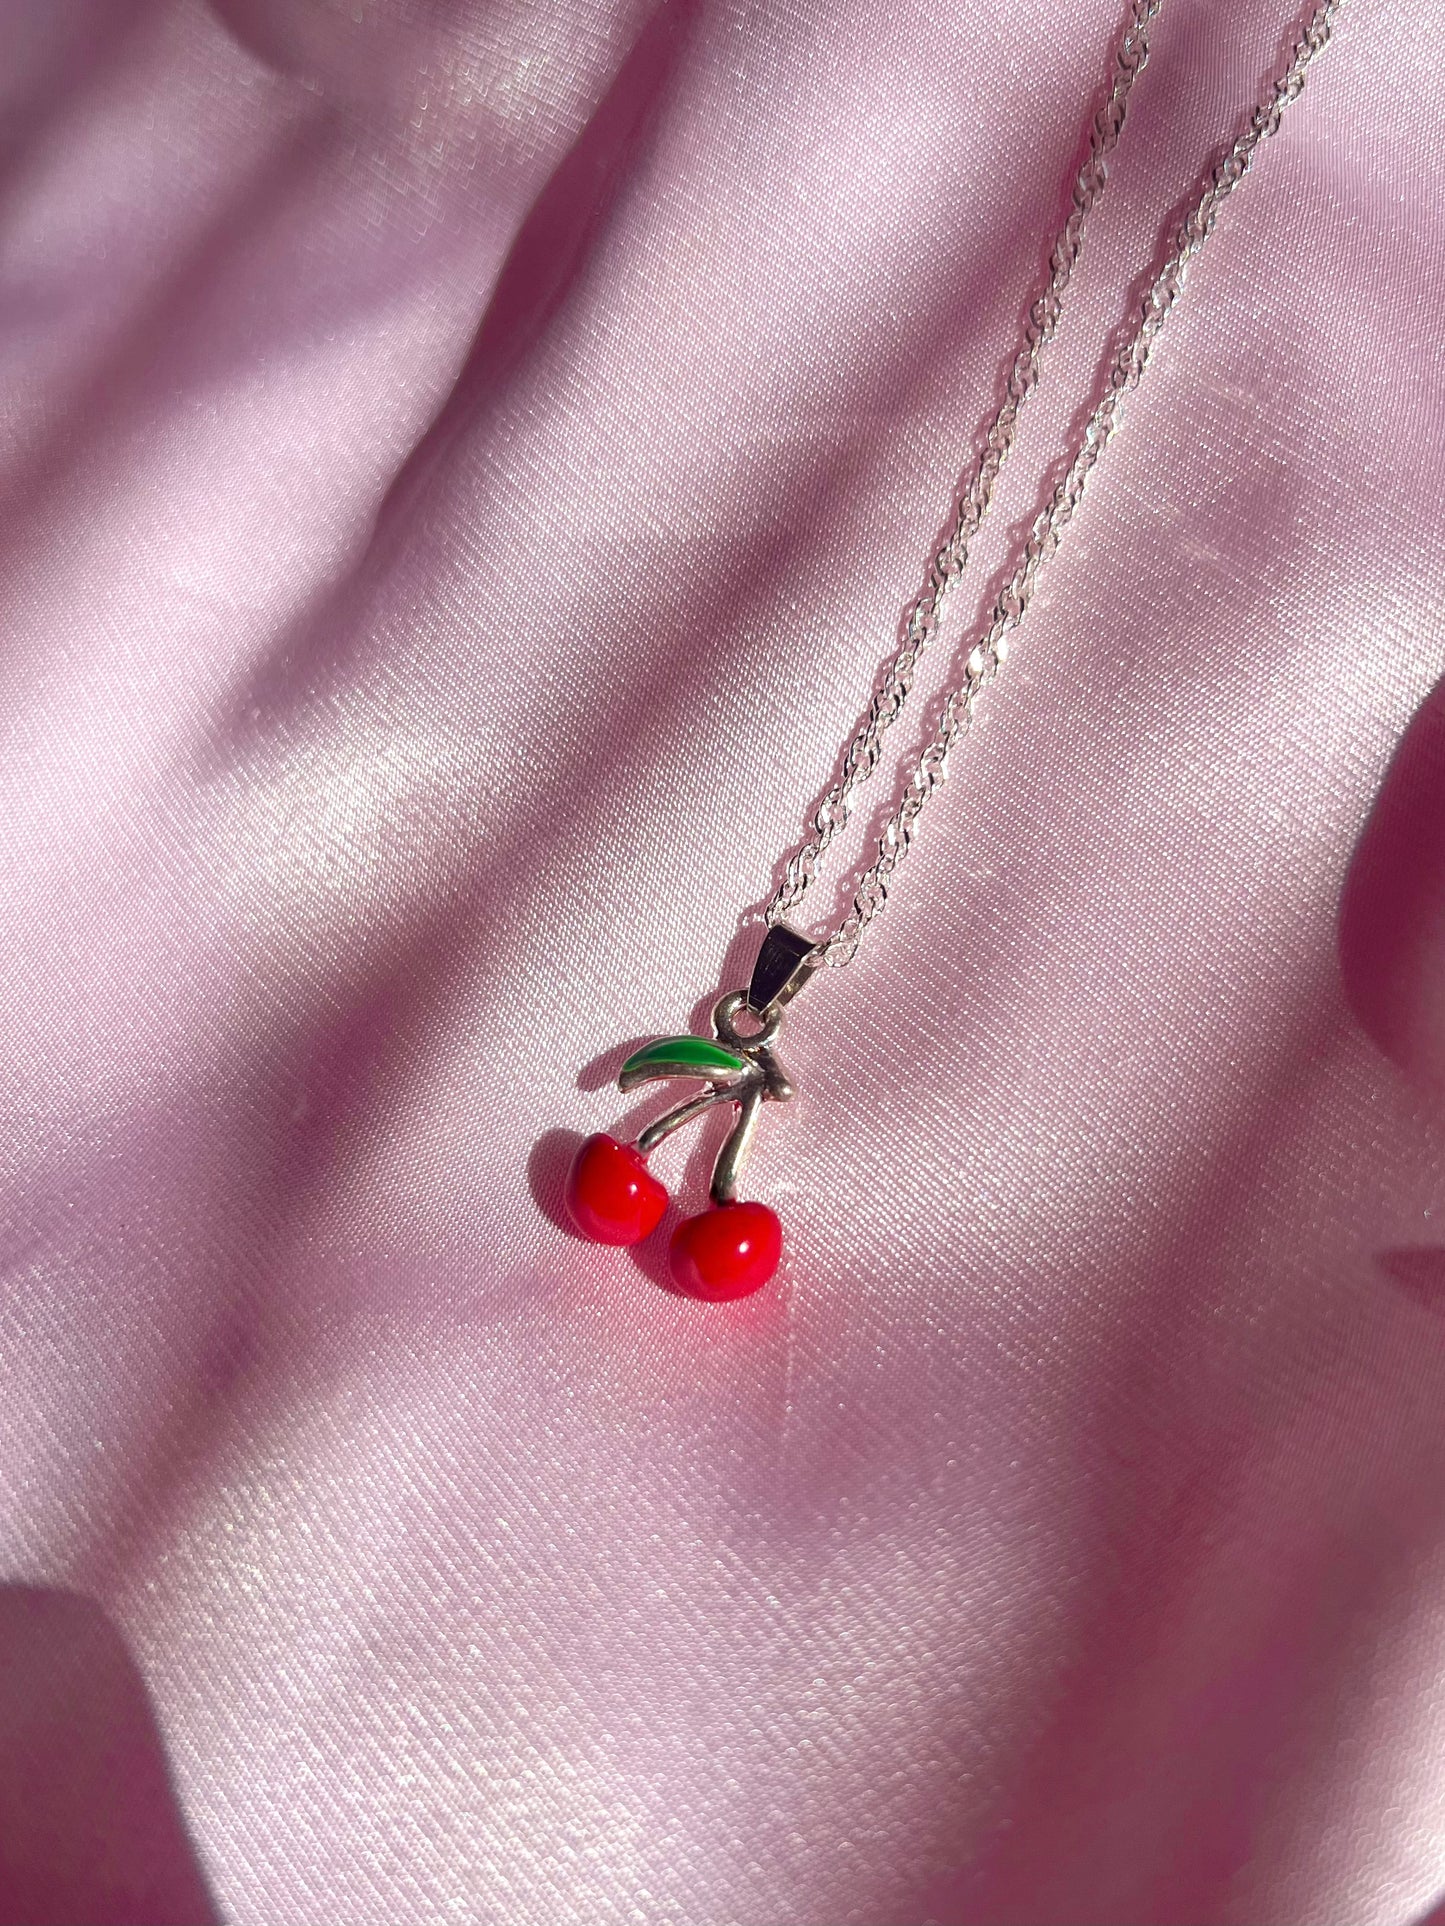 Load image into Gallery viewer, Cherry Bomb Necklace
